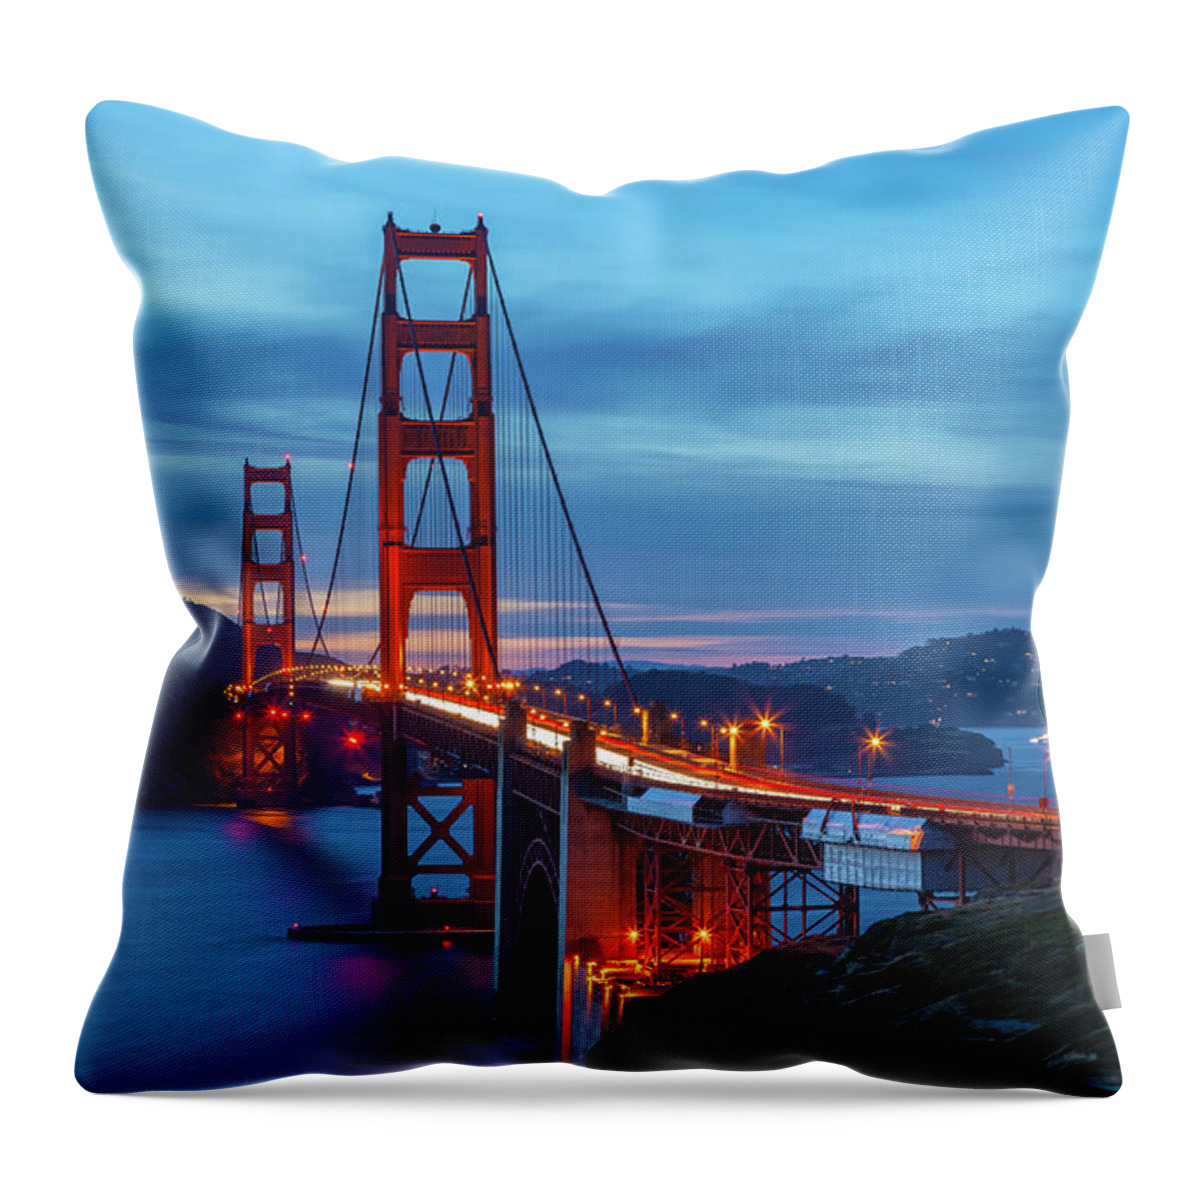 Shoreline Throw Pillow featuring the photograph Golden Gate At Nightfall by Jonathan Nguyen